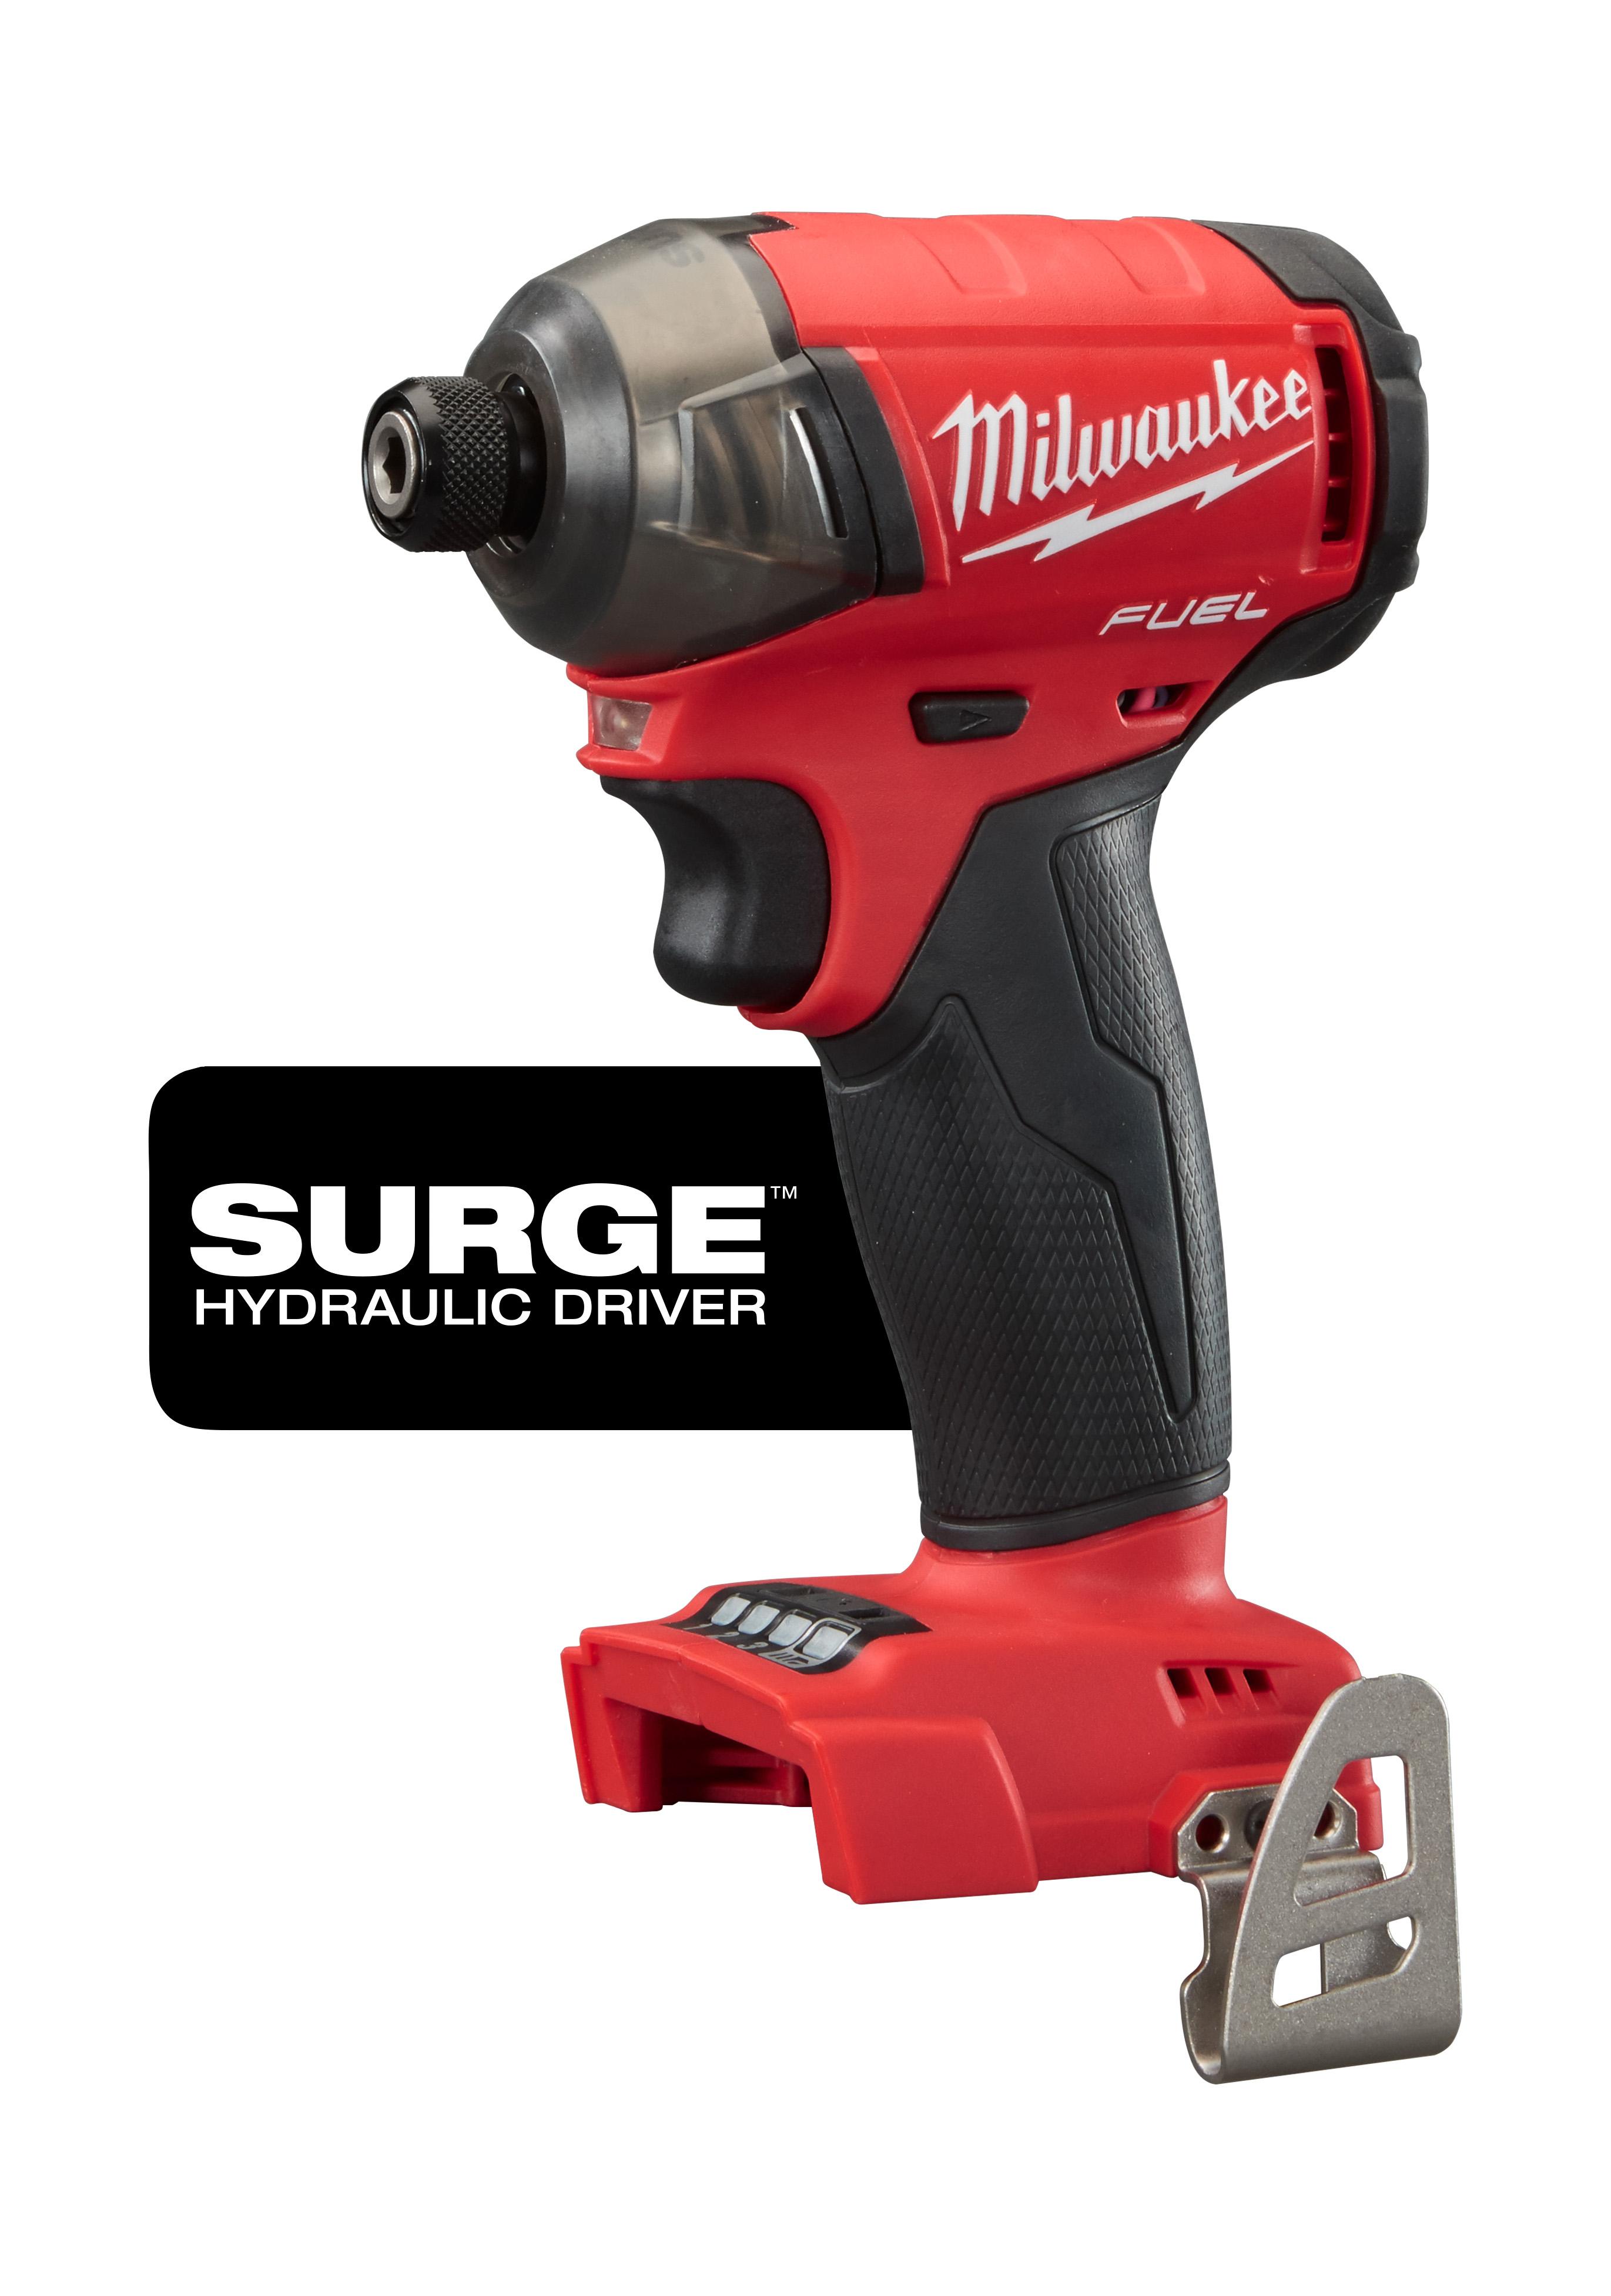 Milwaukee® M18™ 2667-20 2-Speed Compact Right Angle Cordless Impact Driver, 1/4 in Hex/Right Angle Drive, 0 to 2400/0 to 3400 bpm, 675 in-lb Torque, 18 VAC, 12-1/8 in OAL